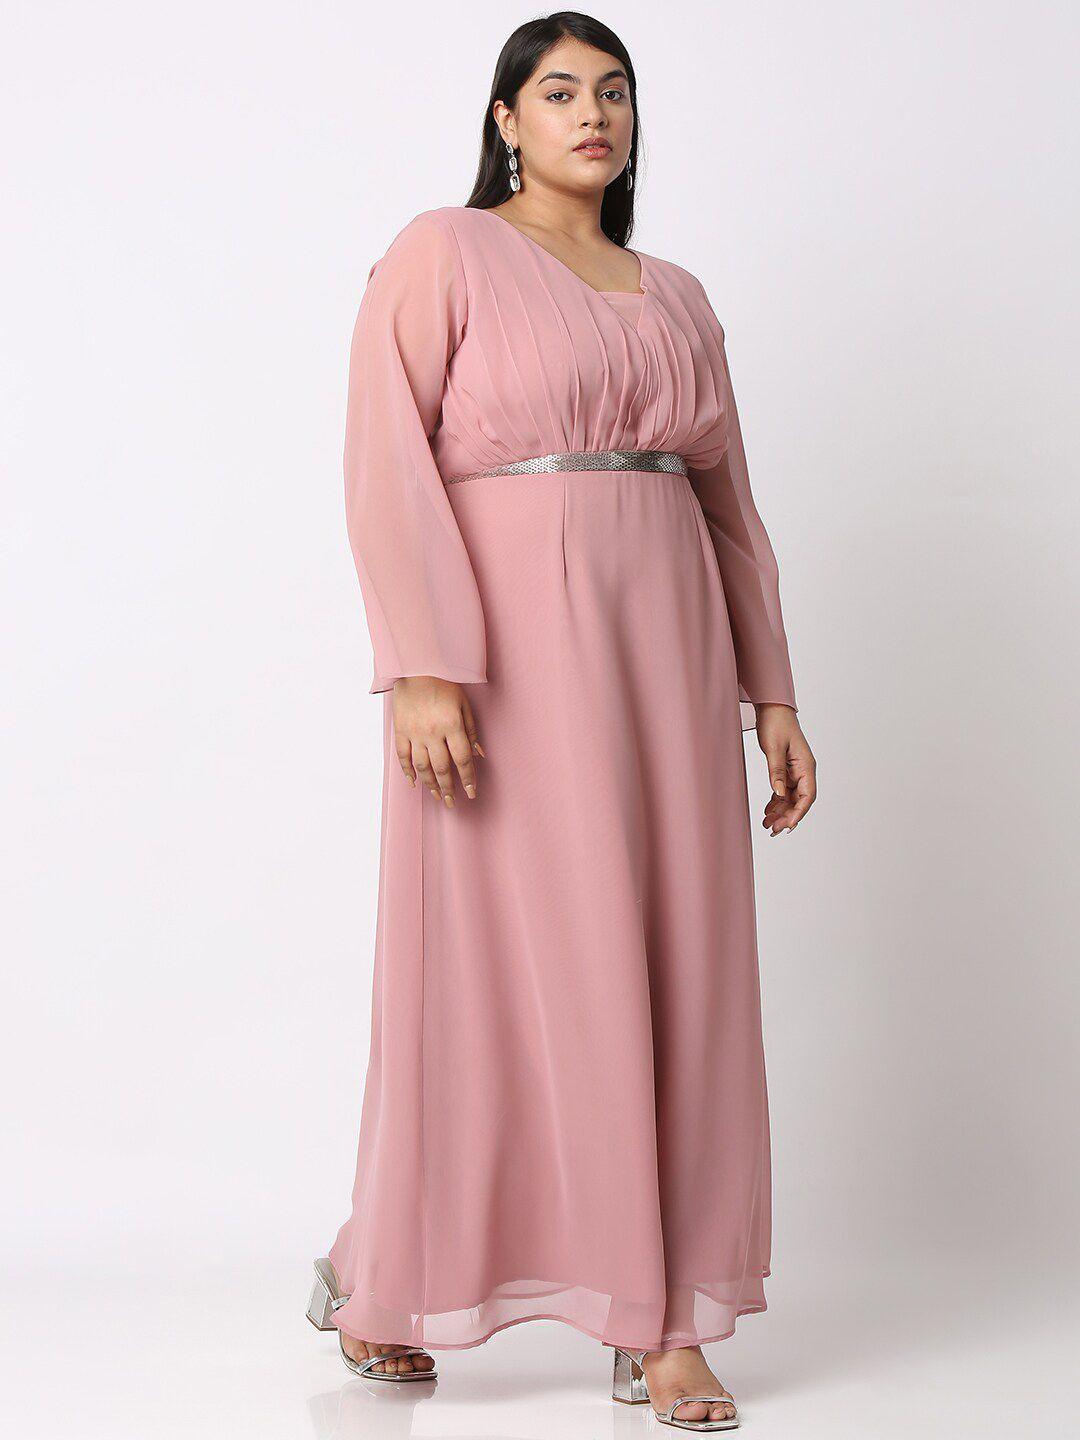 curves by mish georgette maxi dress